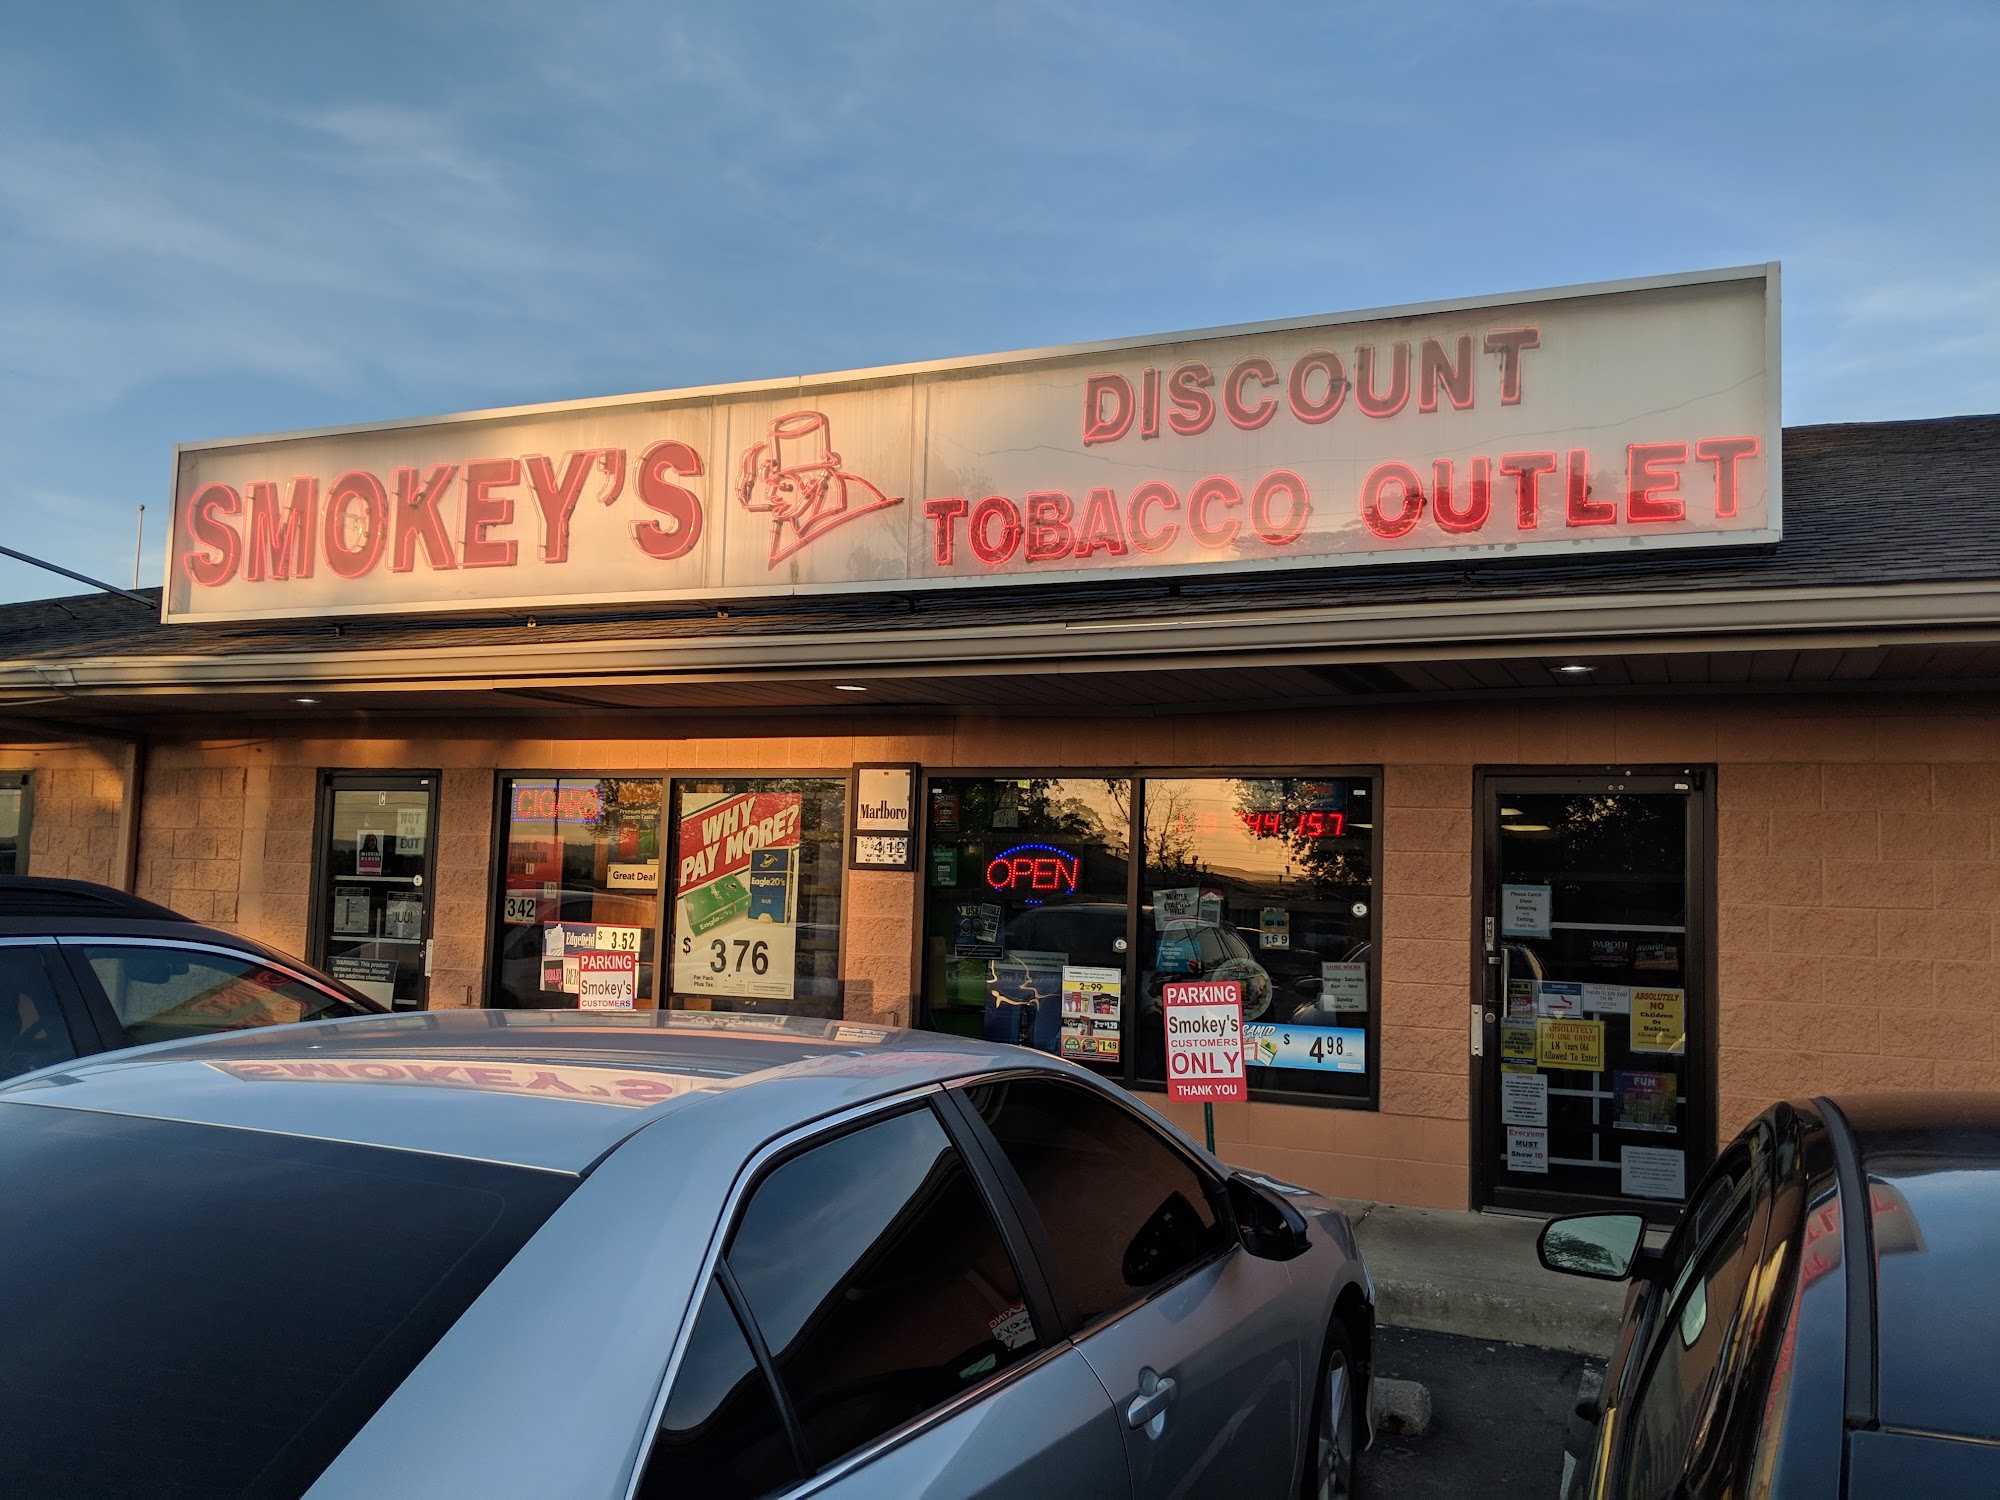 Smokey's Discount Tobacco Outlet